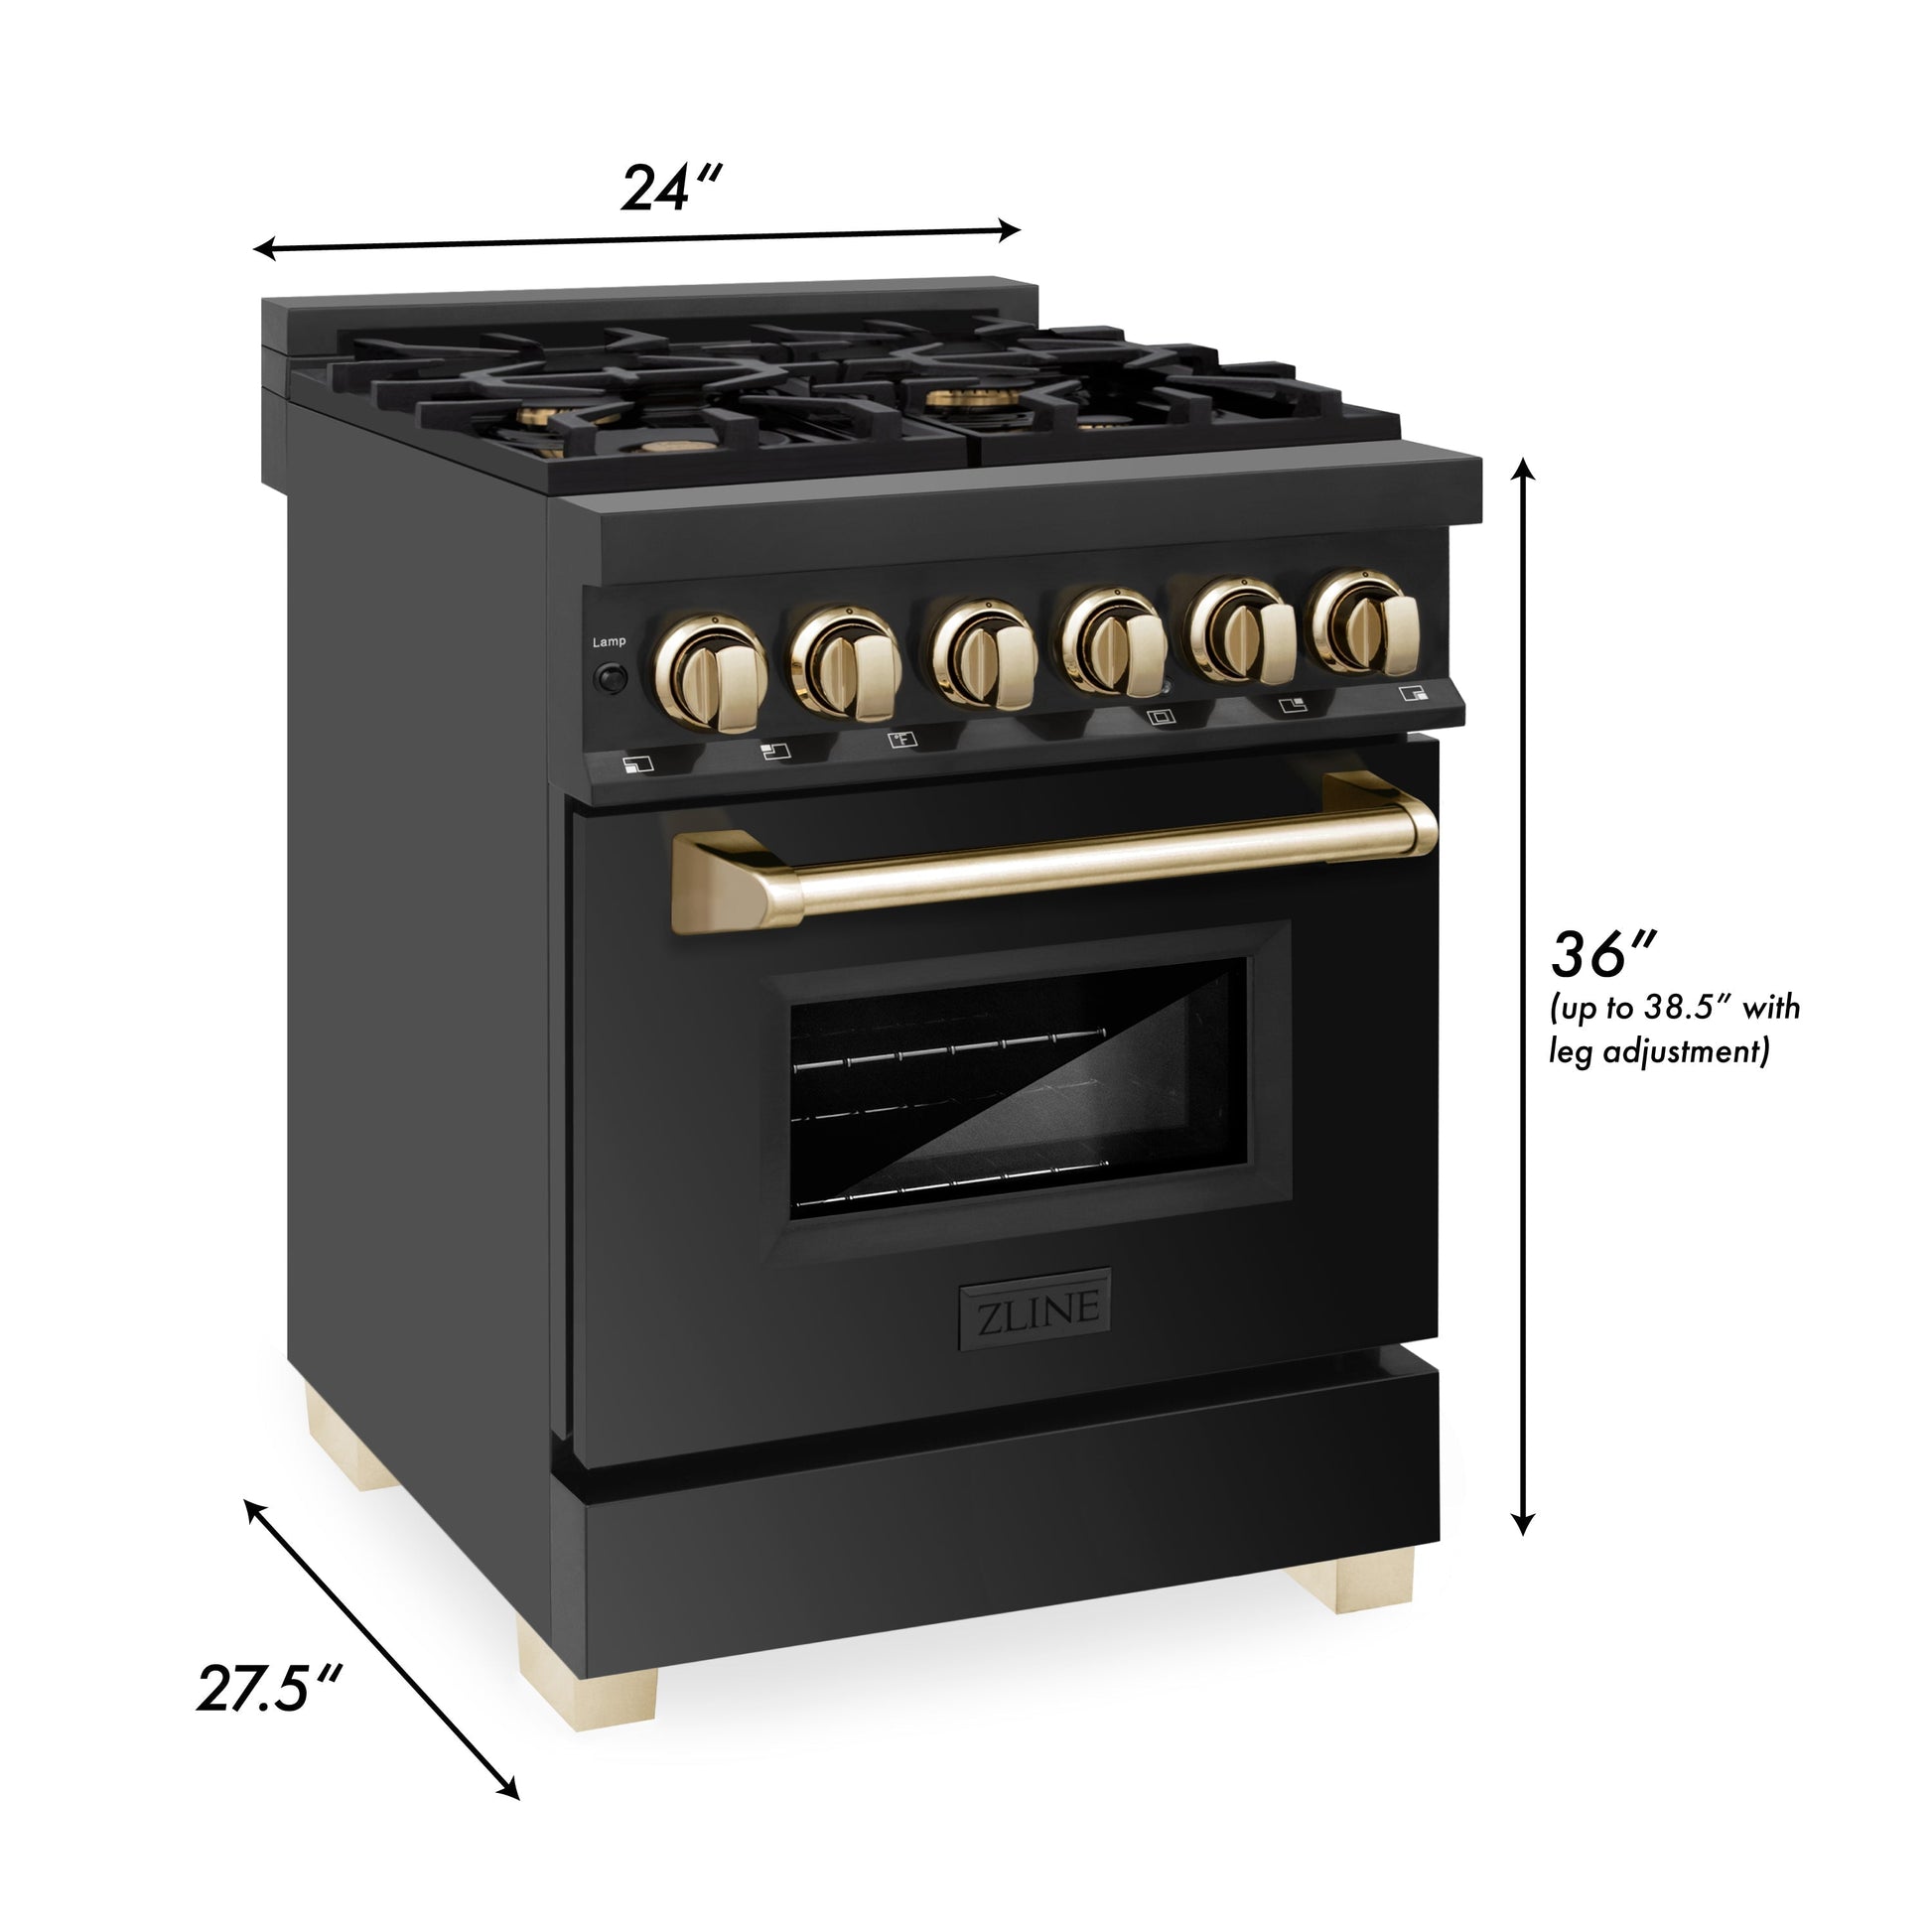 ZLINE Autograph Edition 24" Dual Fuel Range with Gas Stove and Electric Oven - Black Stainless Steel with Accents